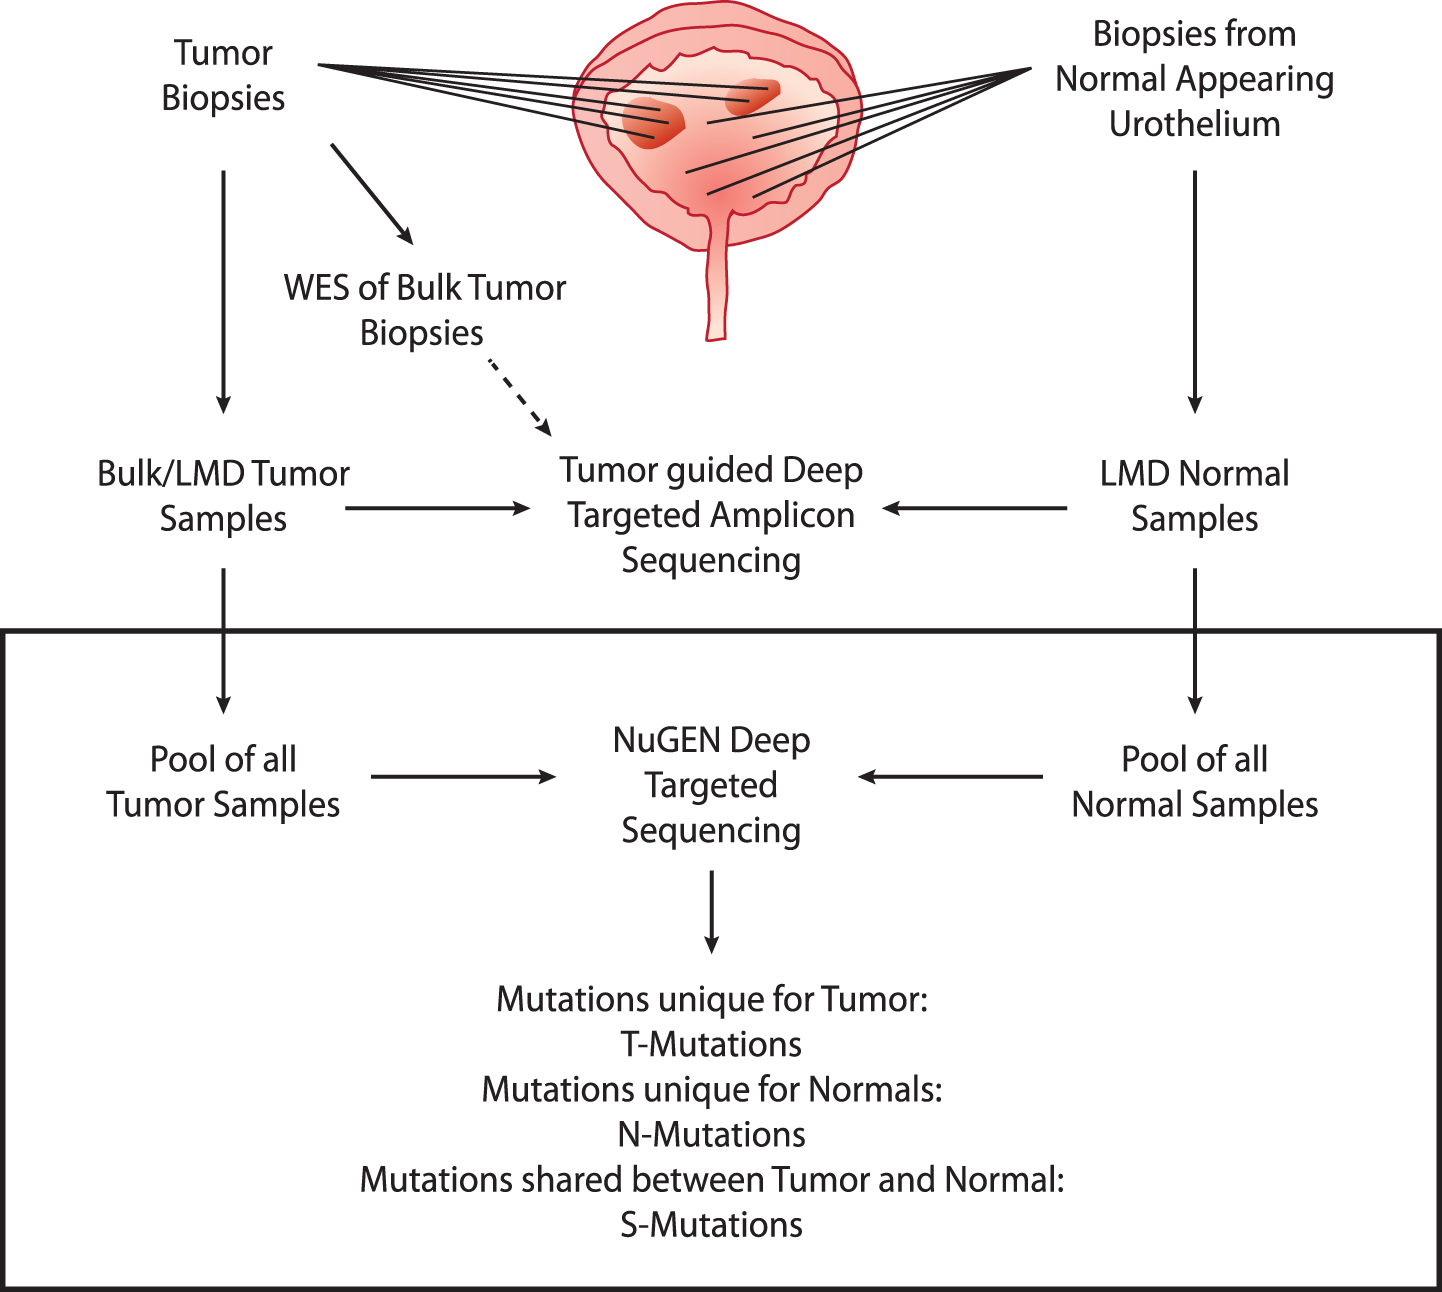 Study design. Upper part: analyses performed previously. WES was performed on bulk tumor samples. Multiple tumor and normal biopsies were laser microdissected (LMD) and subjected to deep-targeted amplicon sequencing guided by the bulk tumor WES. Lower part: present study (black box). Tumor and normal DNA samples were pooled and subjected to deep-targeted amplicon sequencing. Mutation calls were analyzed and grouped into T-Mutations, N-Mutations, and S-Mutations.